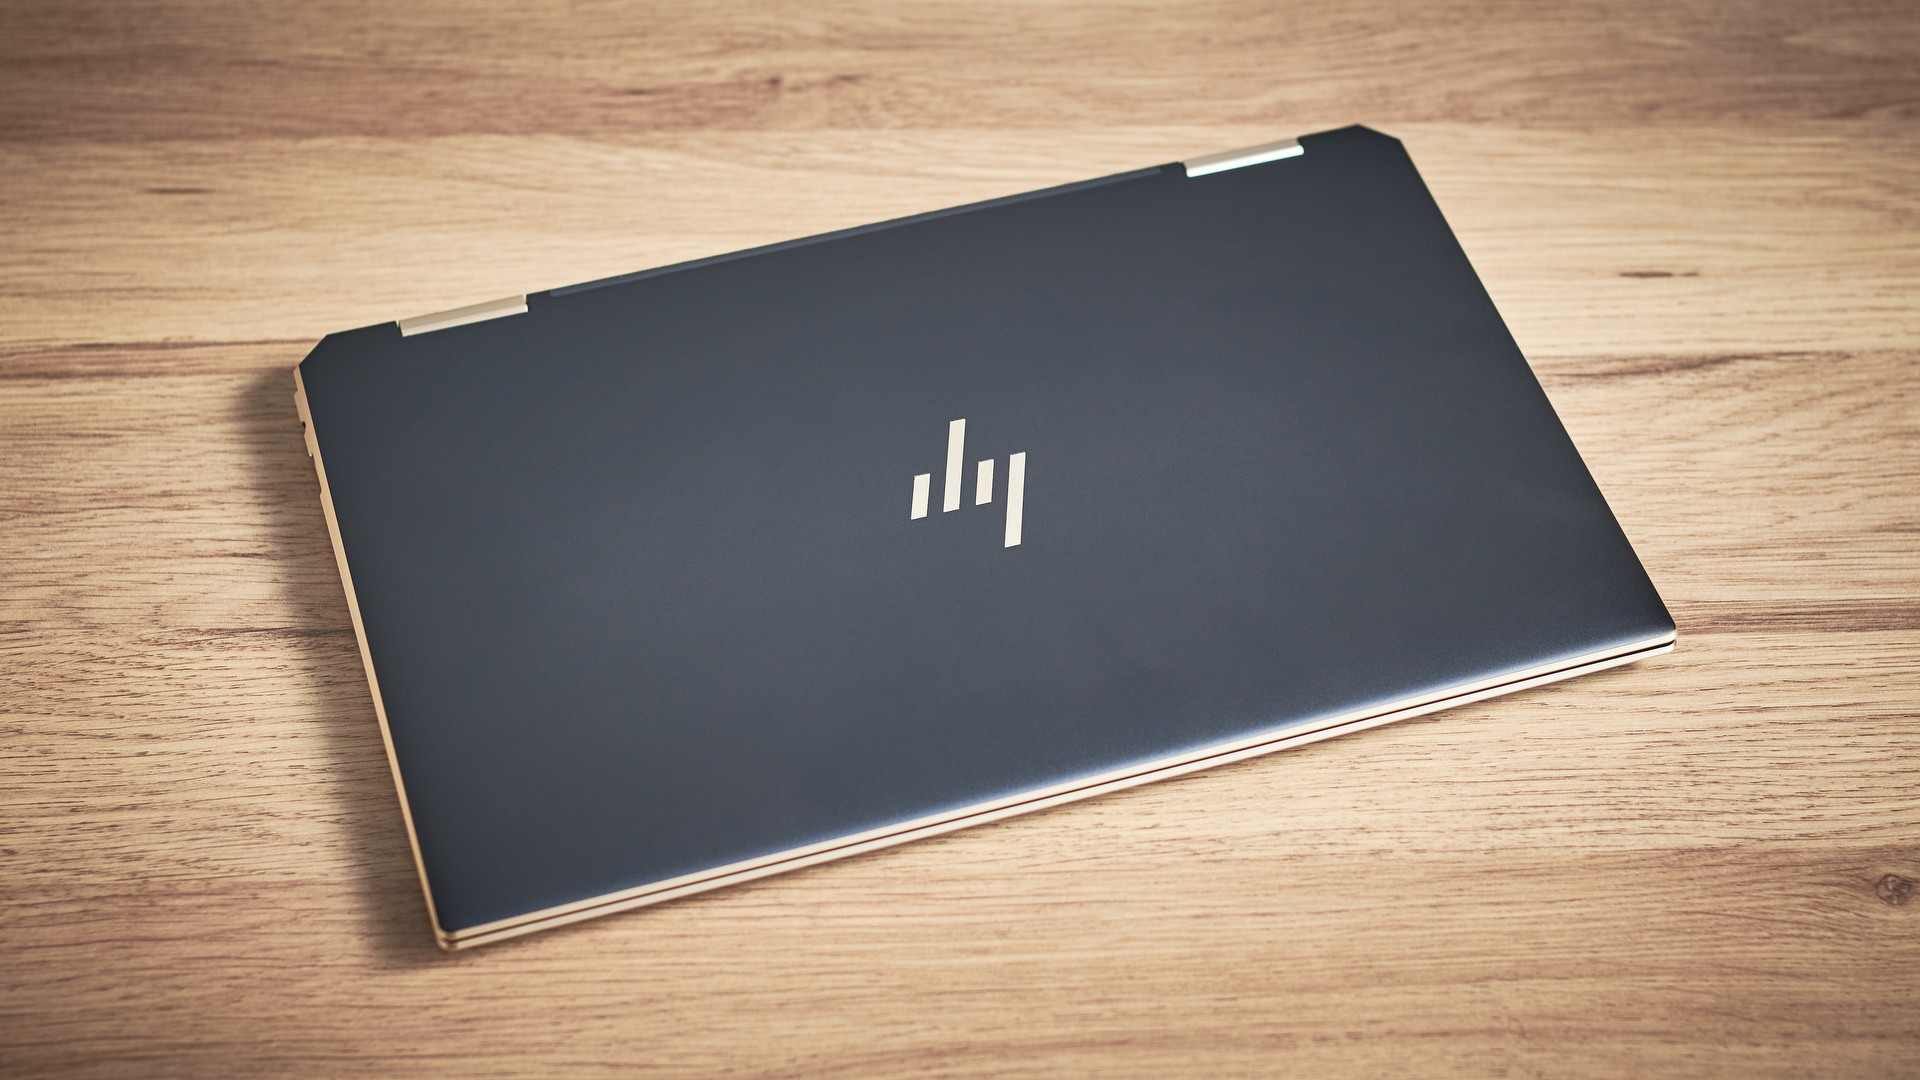 HP Spectre x360 (2020) on a wooden table